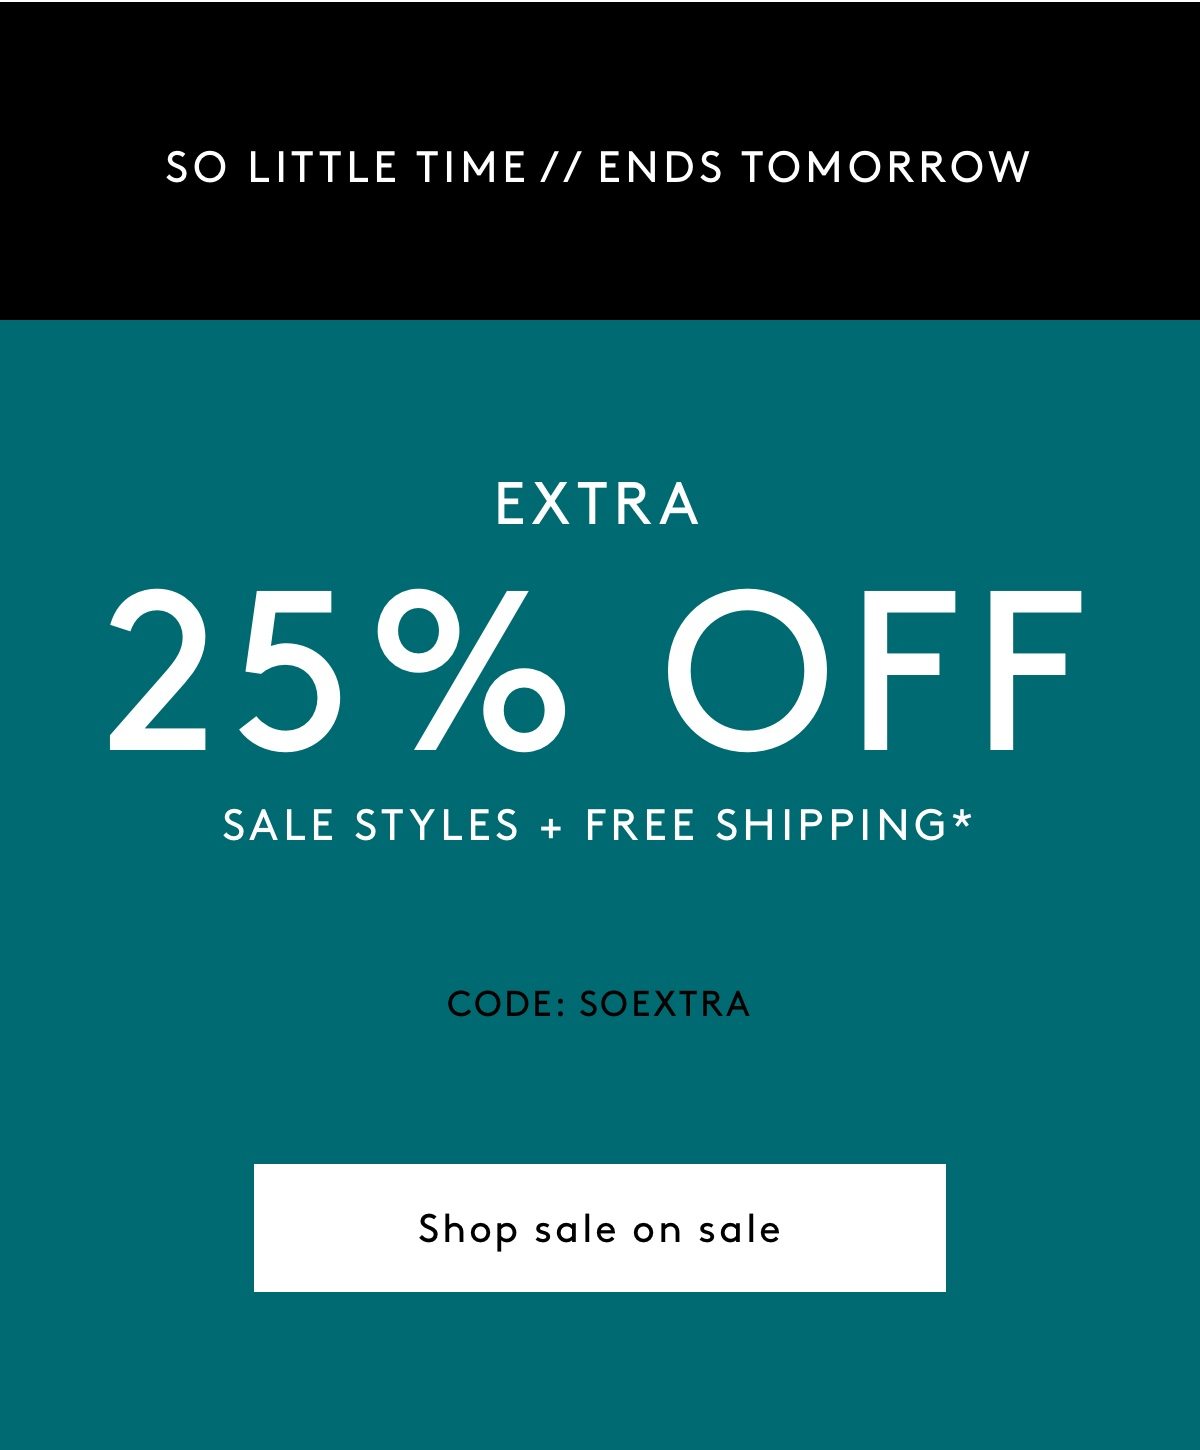 So Little Time // Ends Tomorrow | Extra 25% Off Sale Styles + Free Shipping* Code: SOEXTRA Shop Sale on Sale